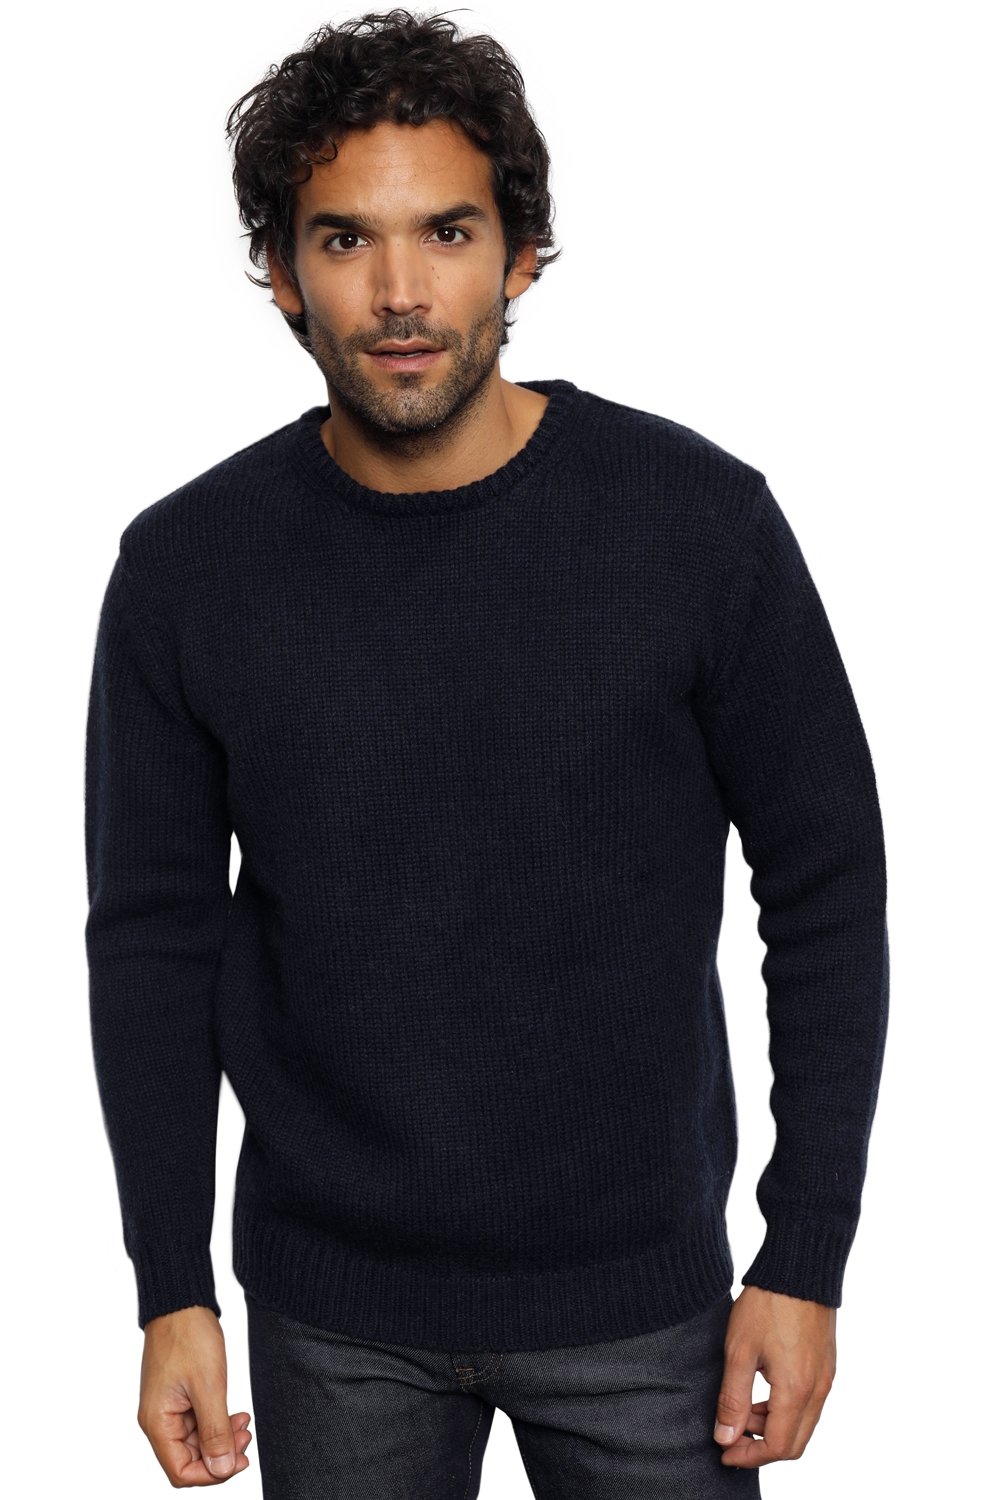 Chameau pull homme cole marine 2xl